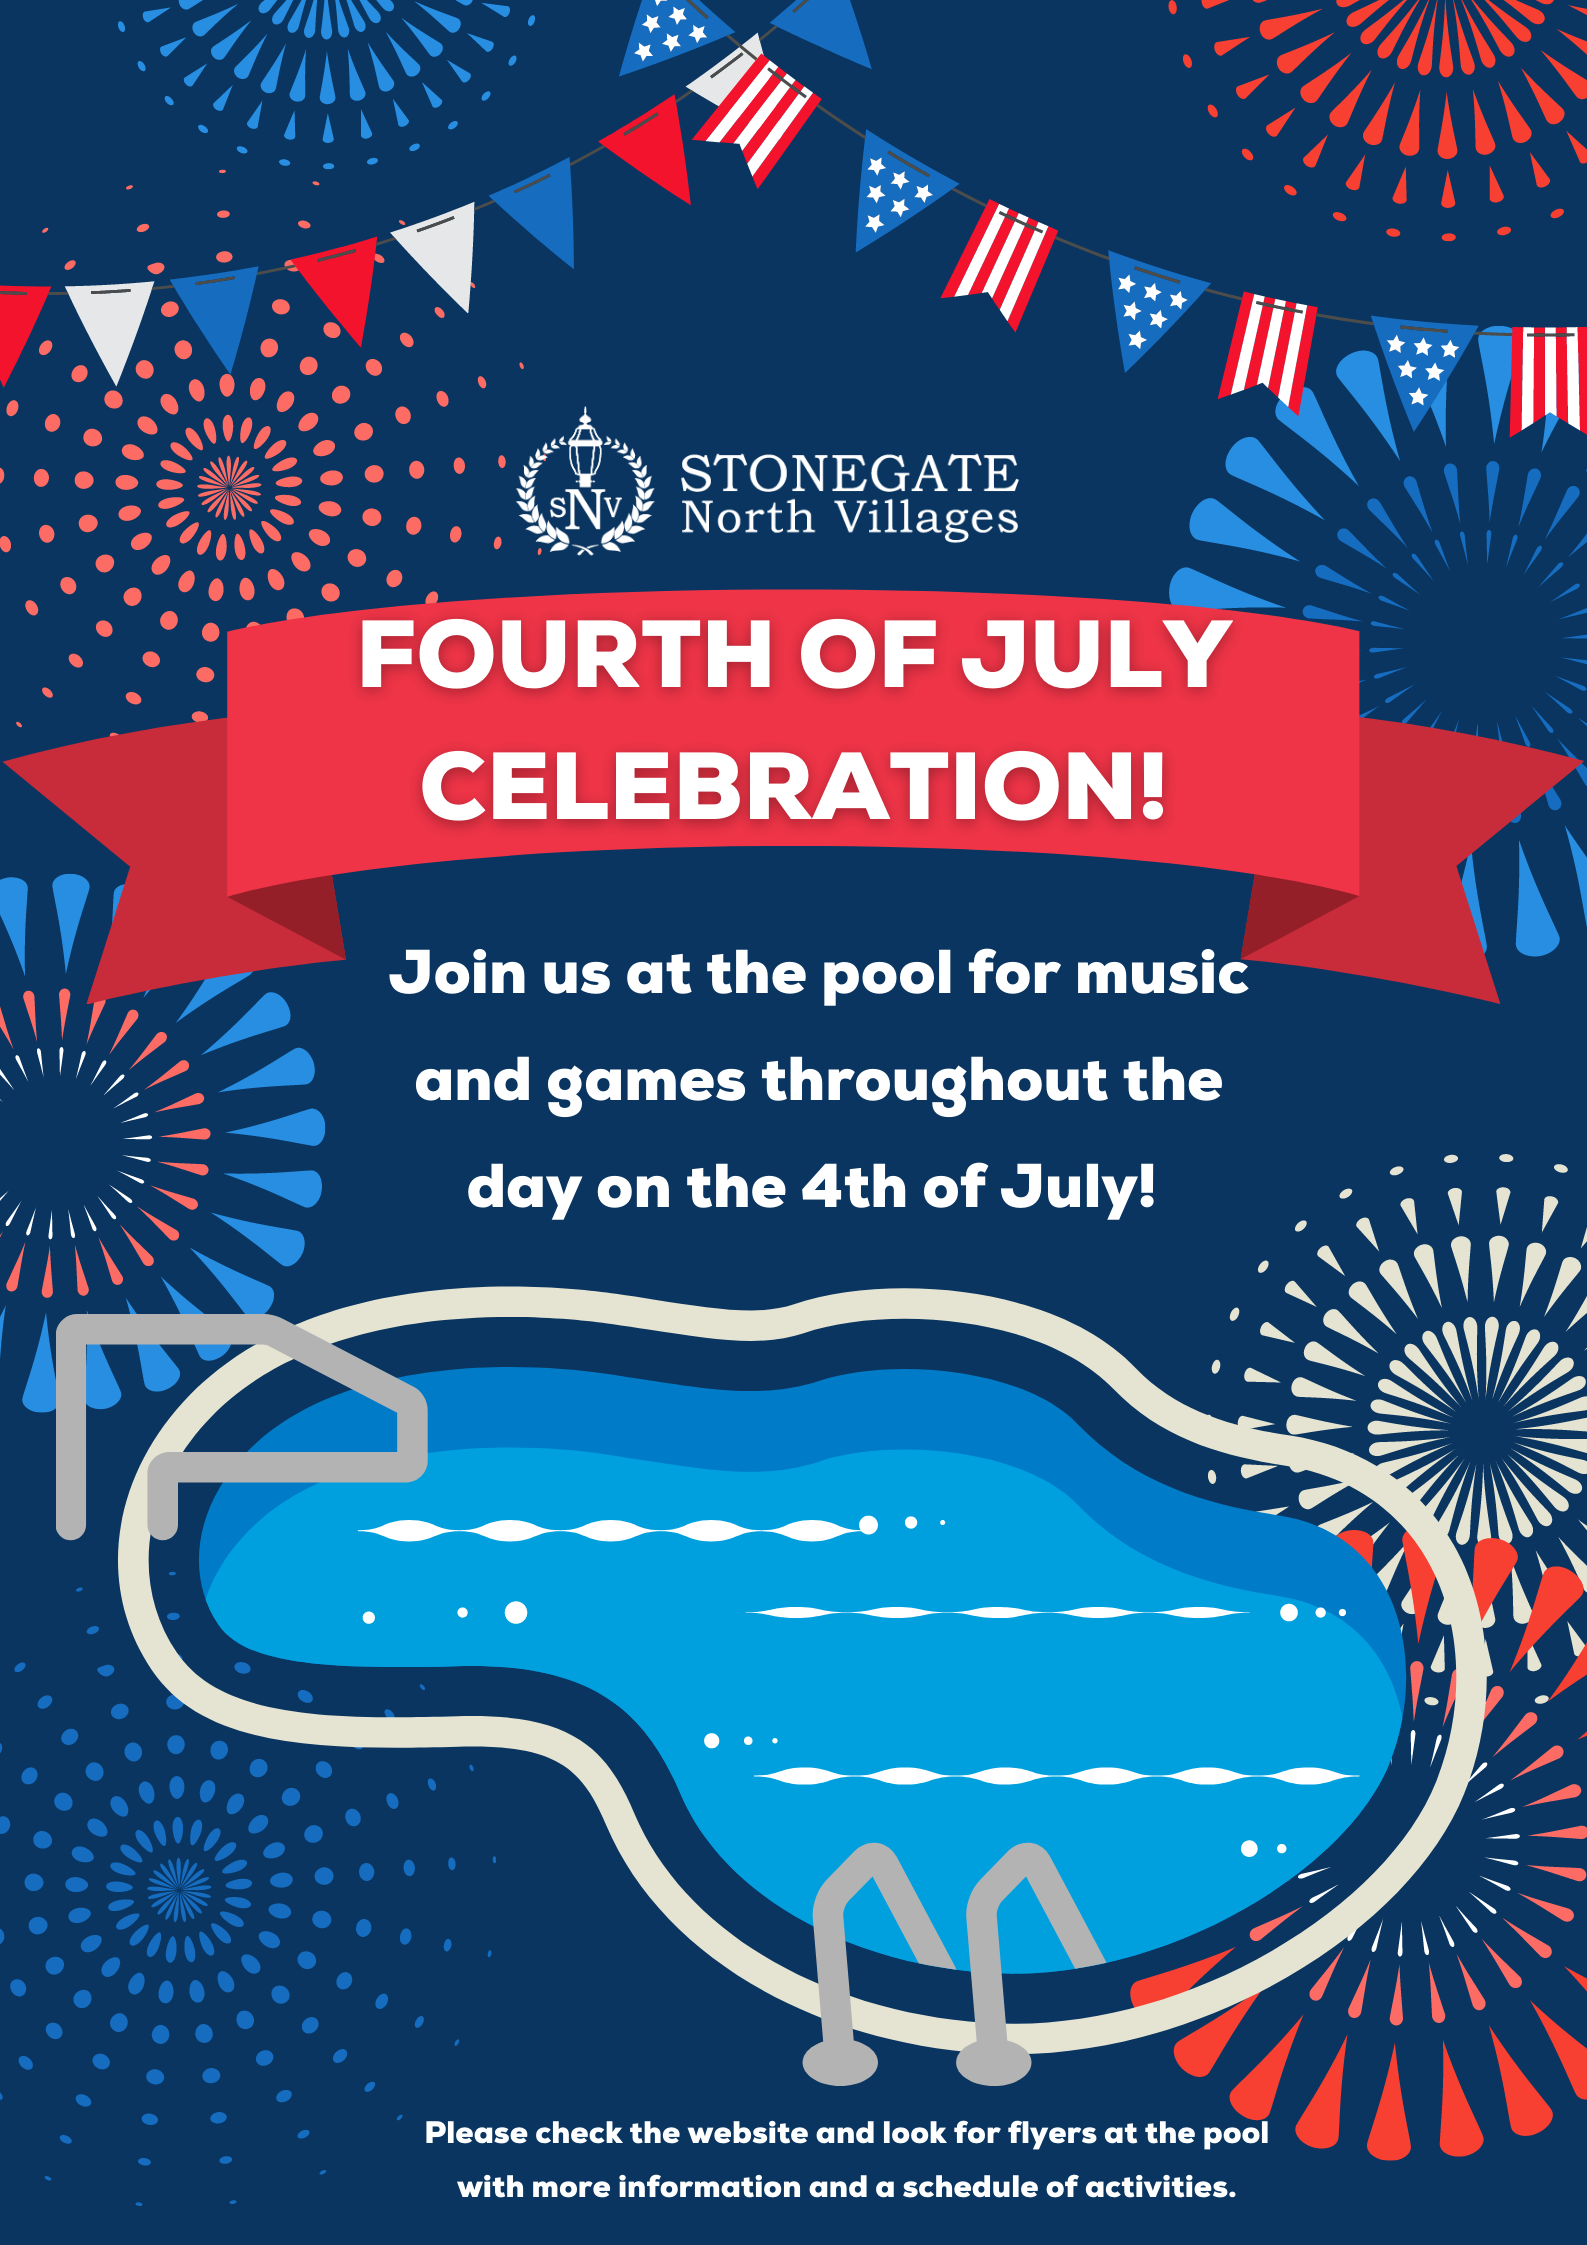 Stonegate North Villages 4th of July poster